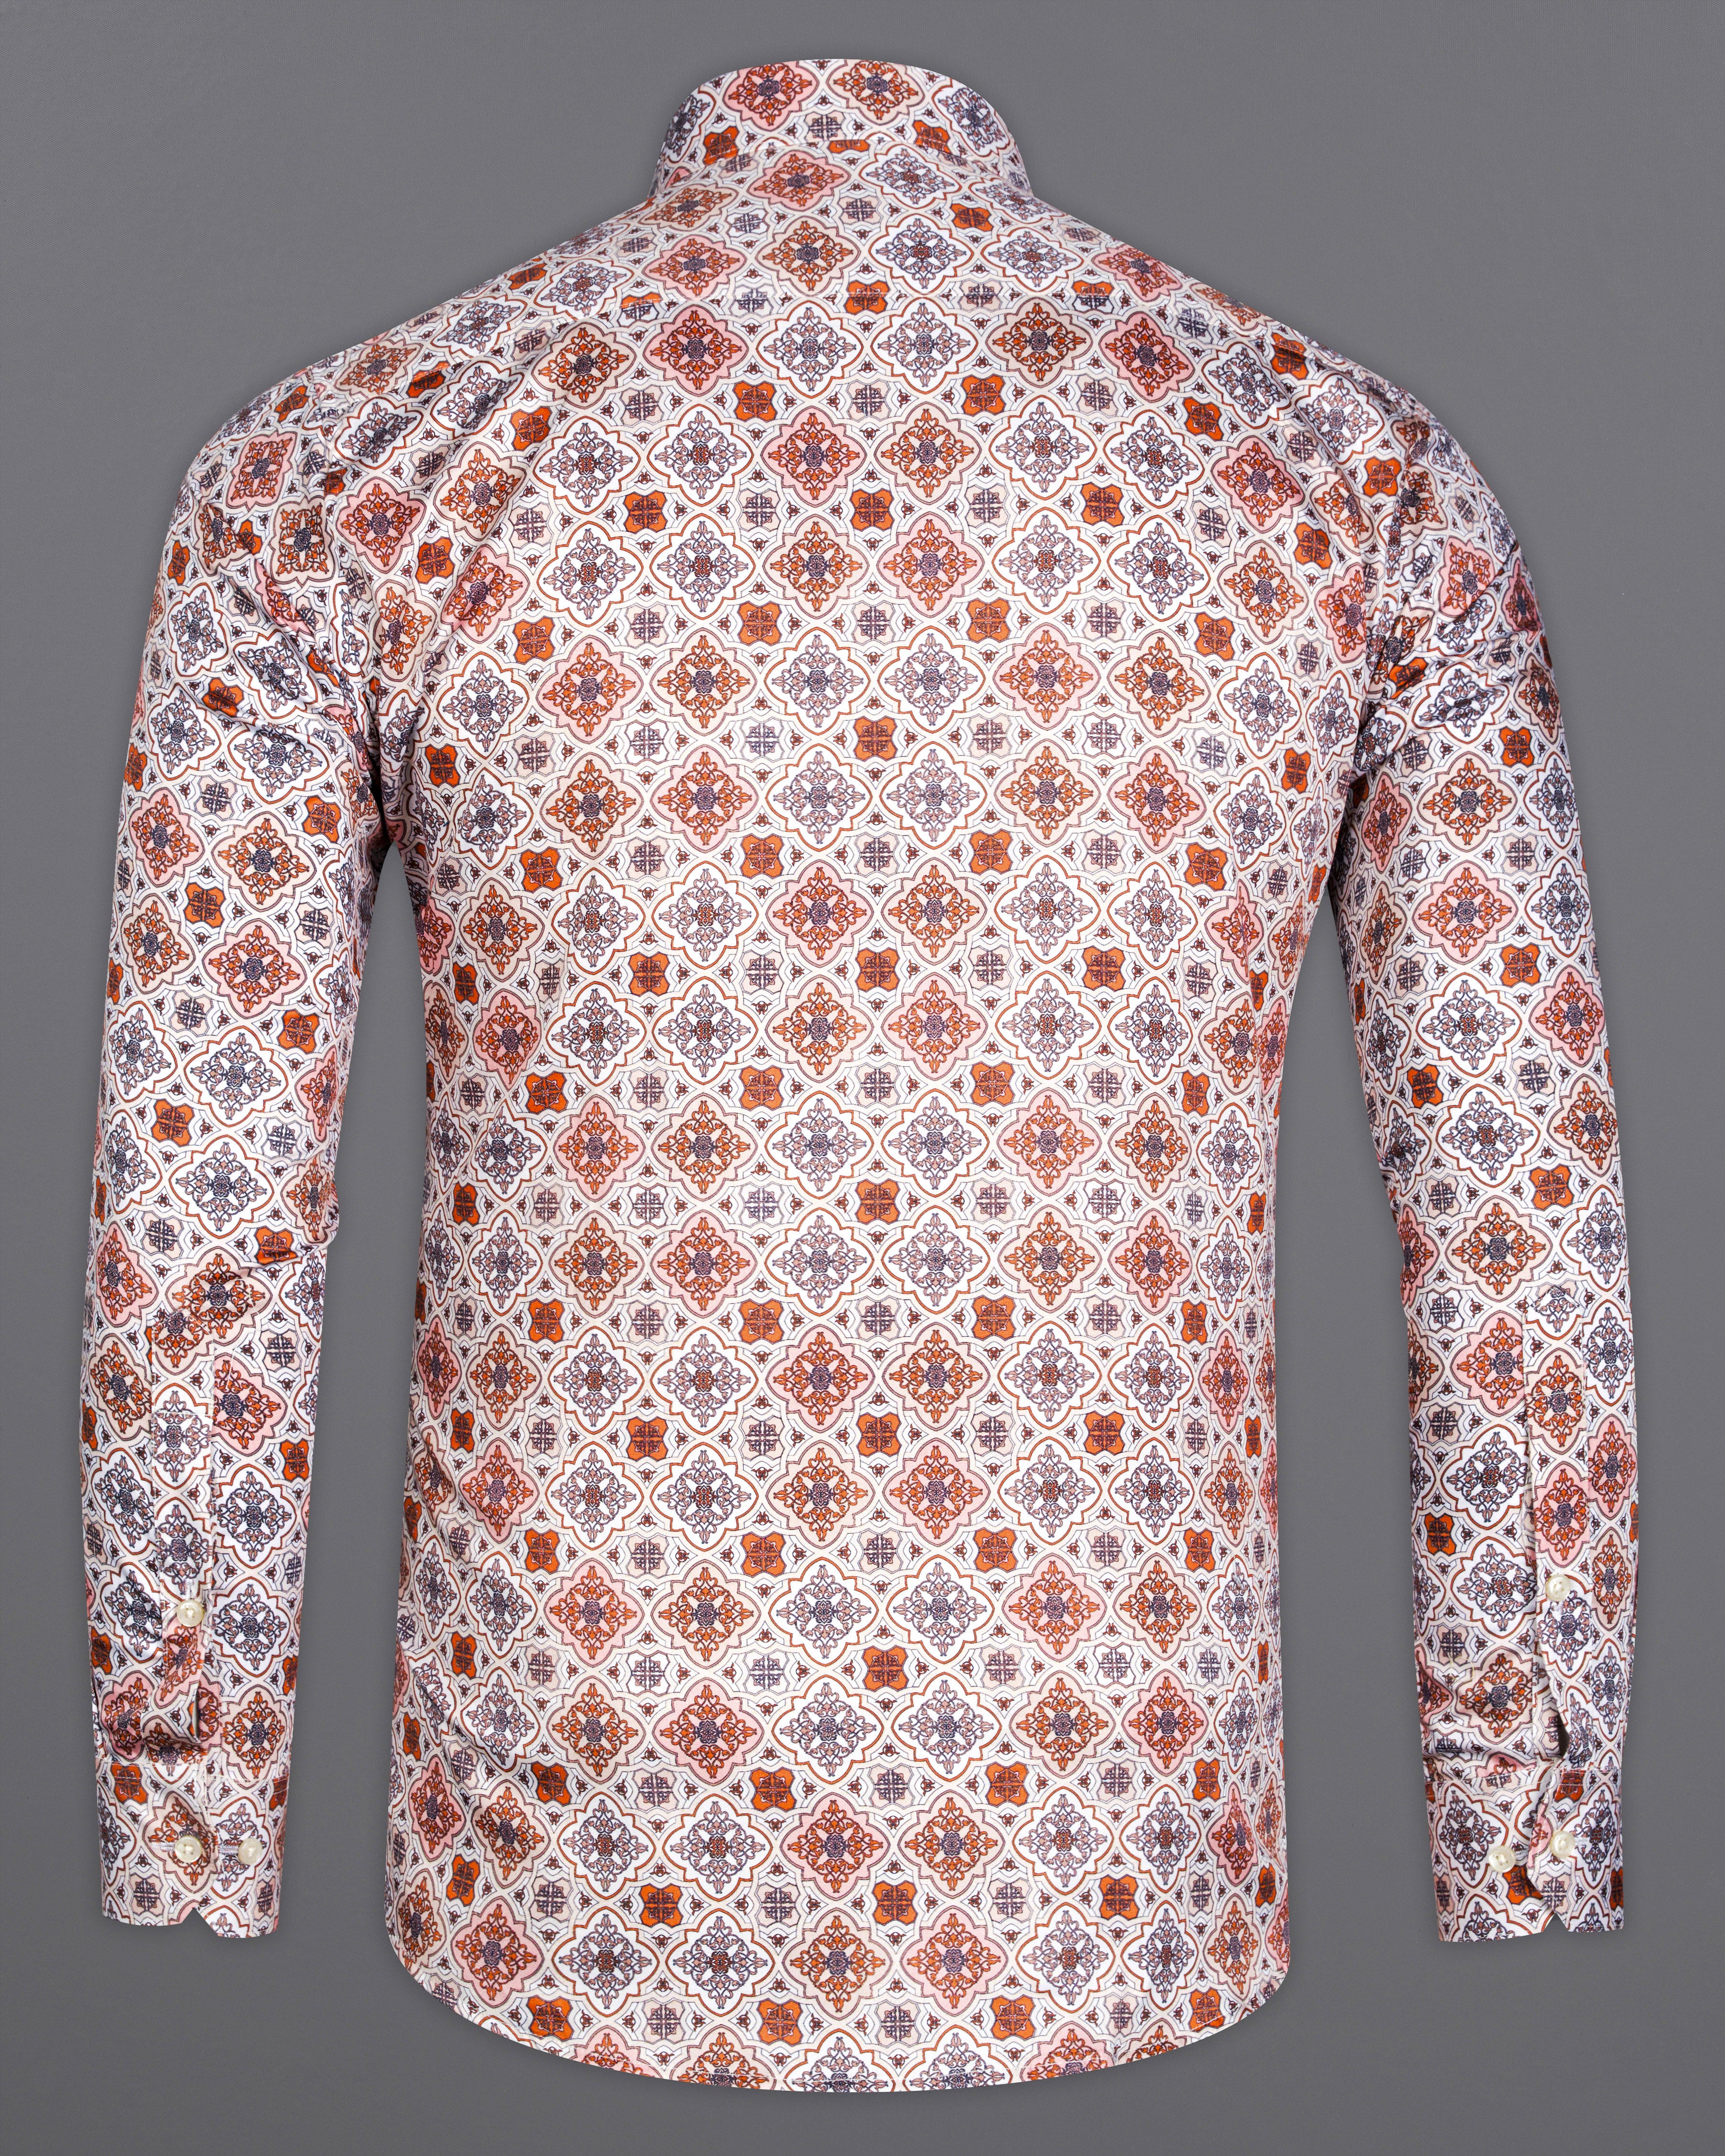 Oyster Off White with Sunrise Orange Indian Style Printed Super Soft Premium Cotton Shirt